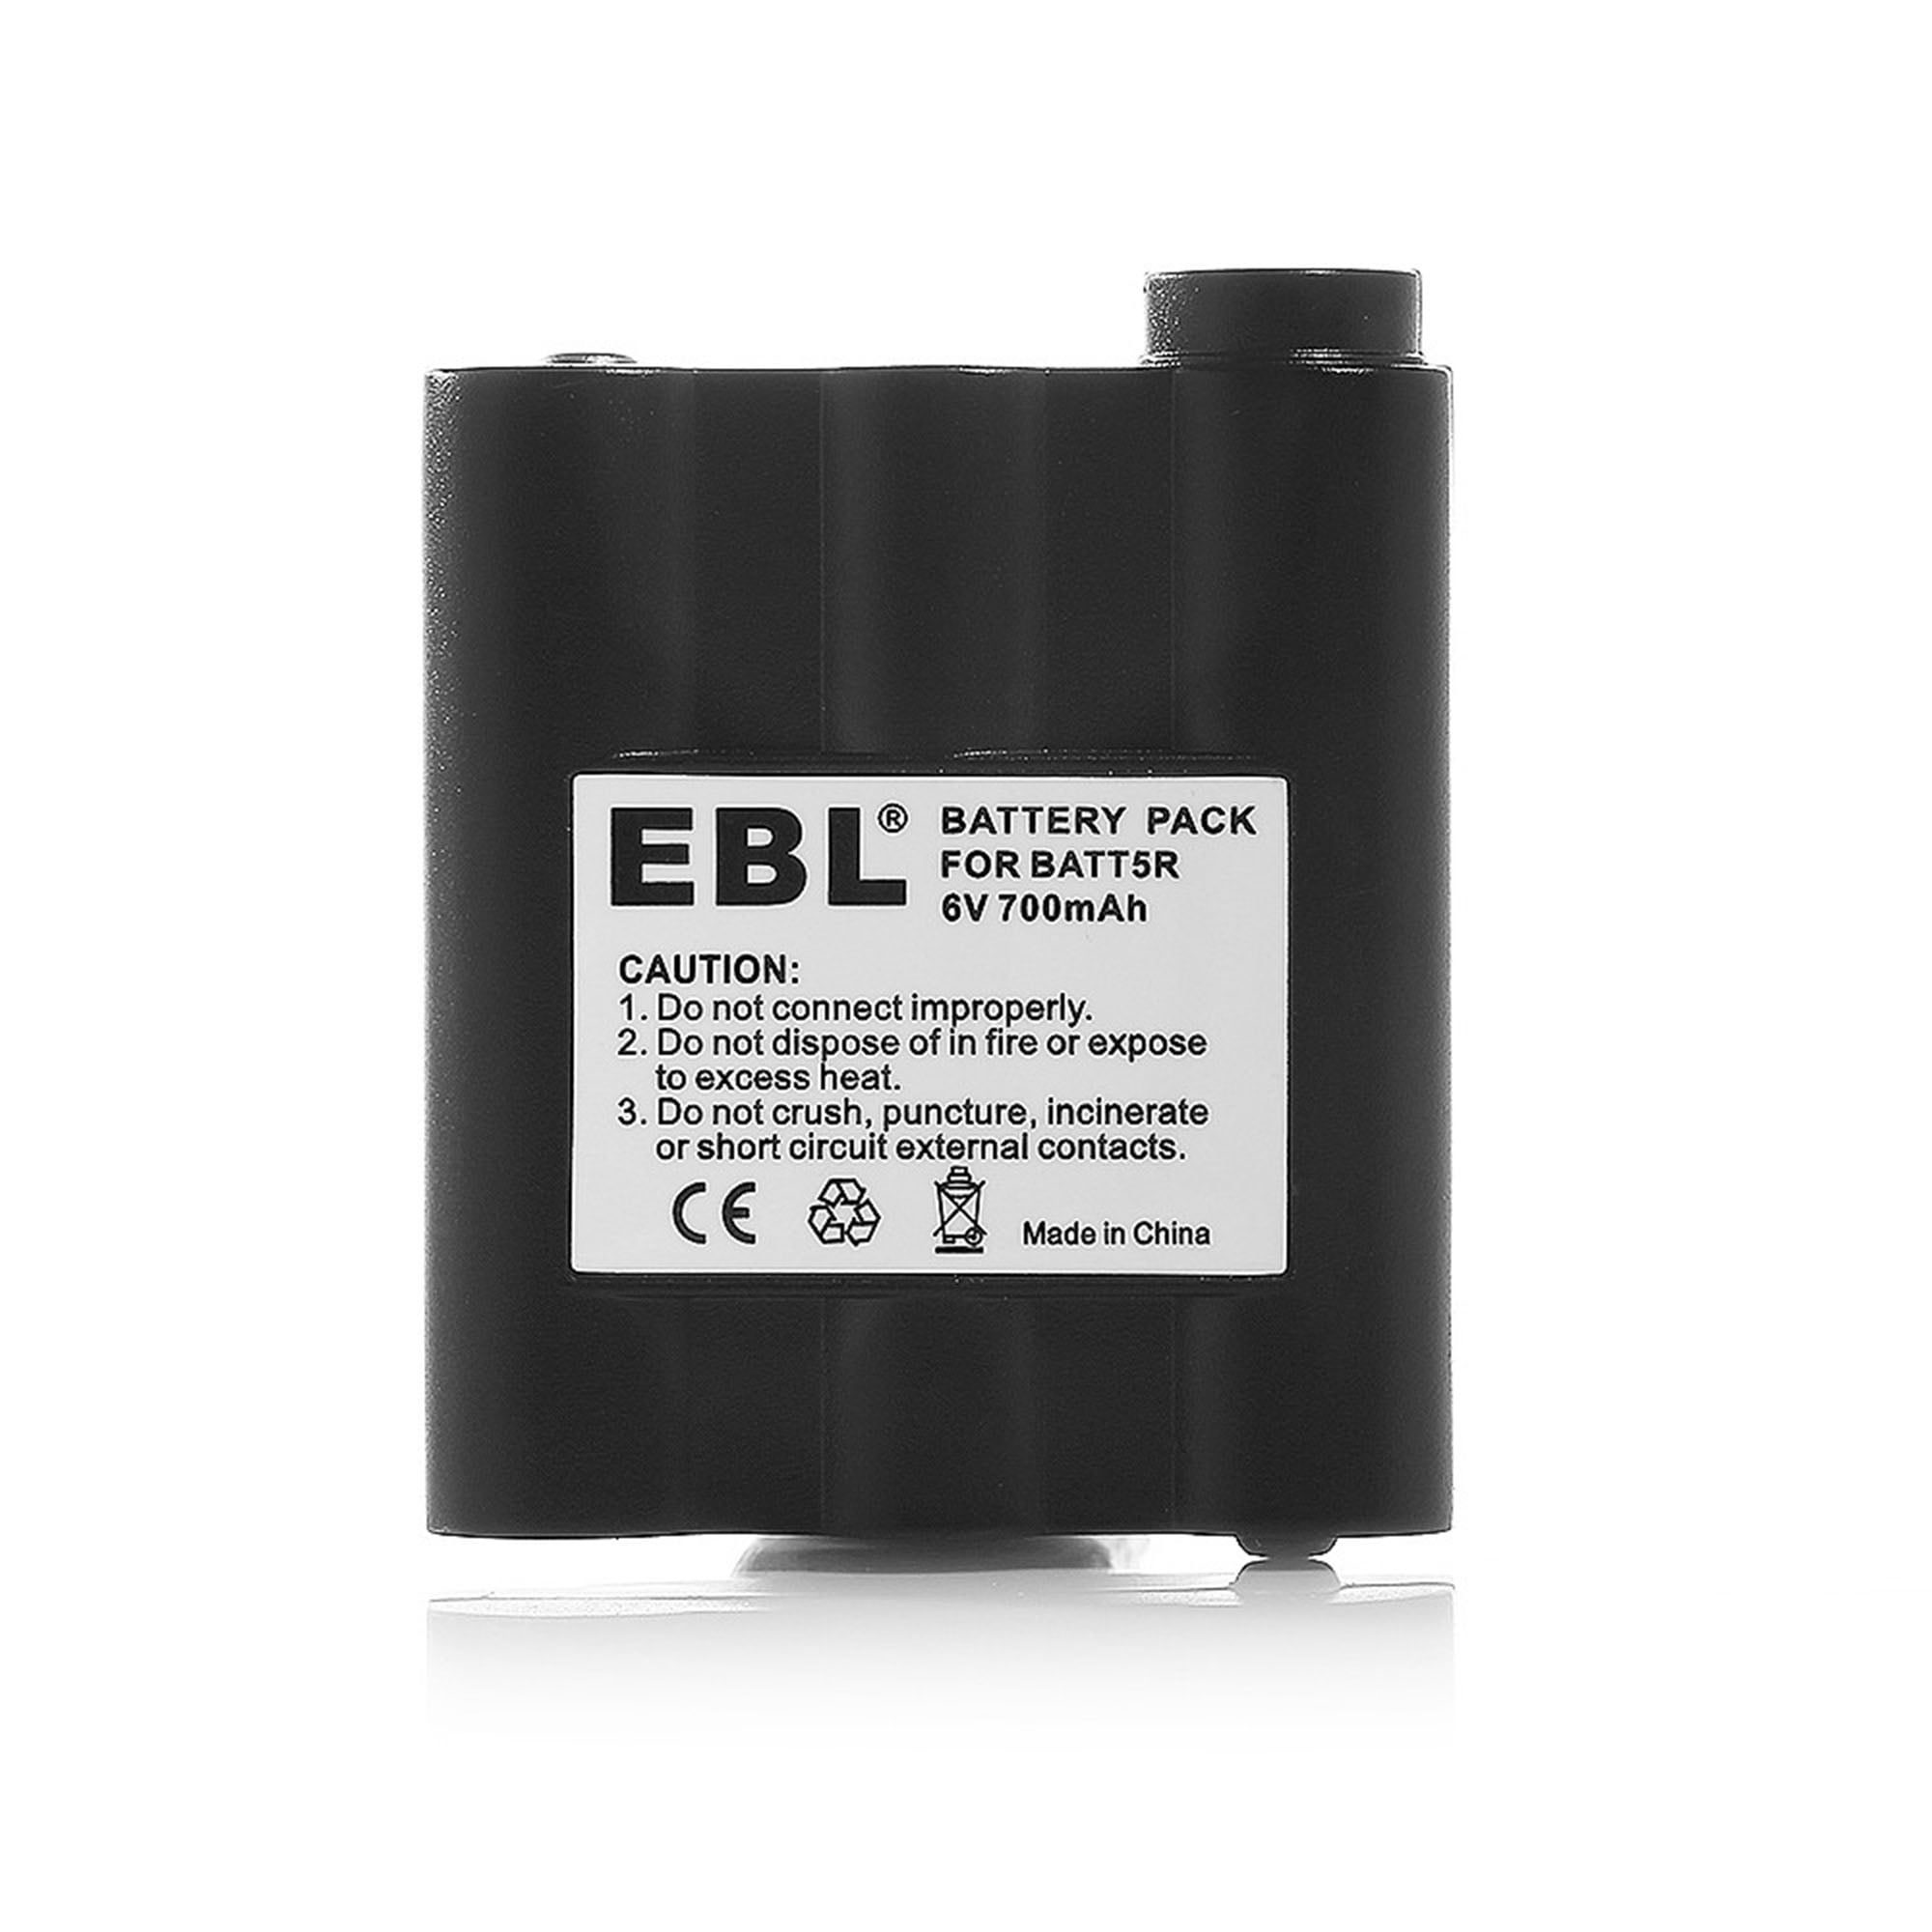 Replacement Battery for Midland Two-Way Radio 800mAh, 6V, NIMH 2 Pack Replacement Battery for Midland LXT310 